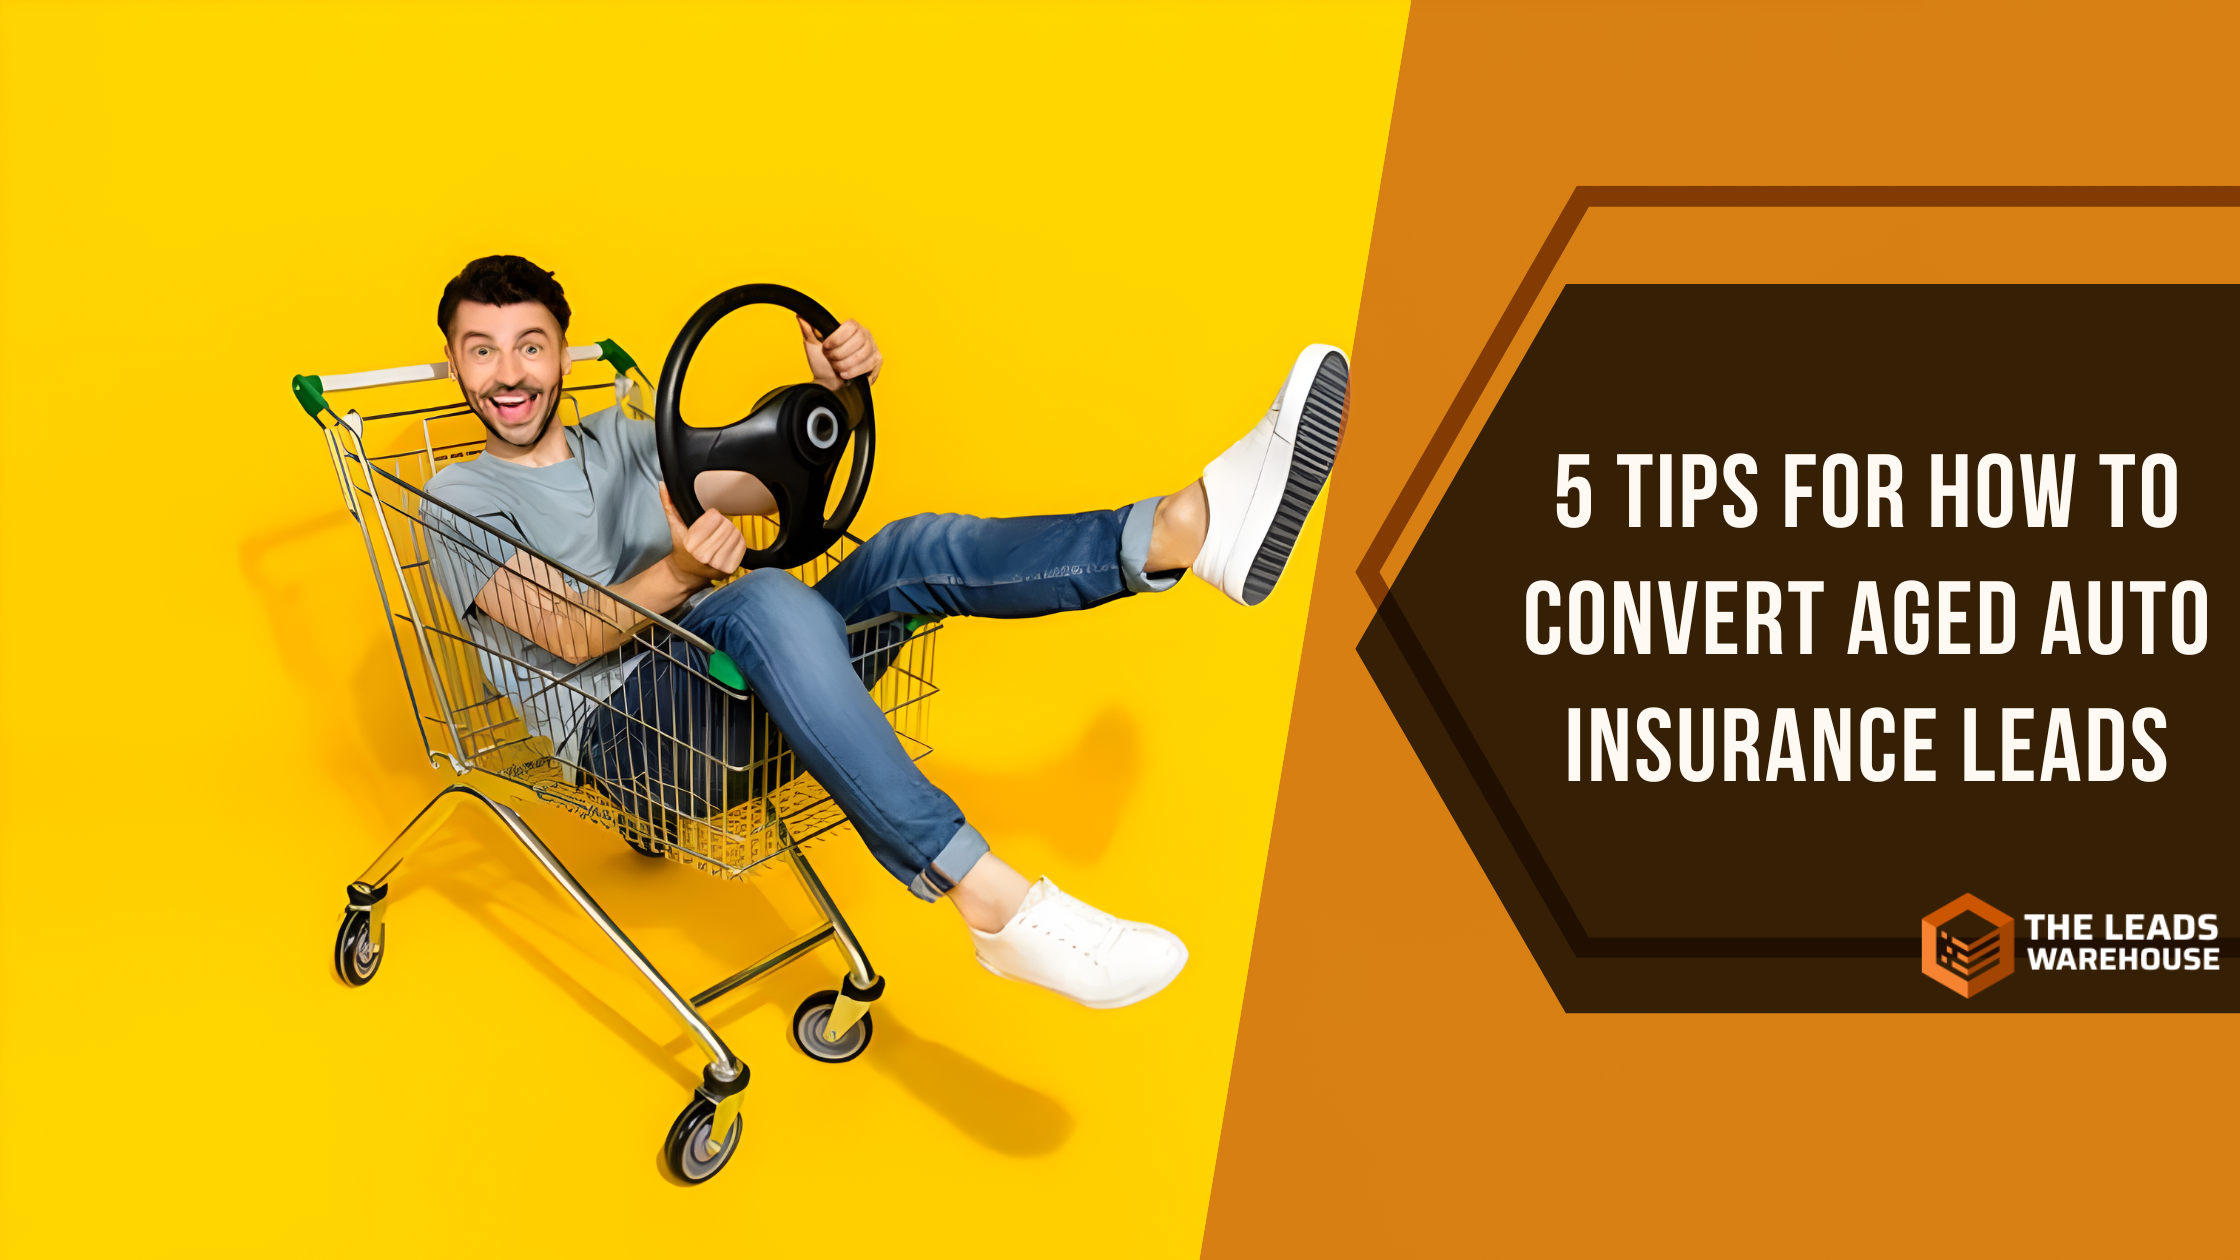 Convert Aged Auto Insurance Leads | 5 Tips